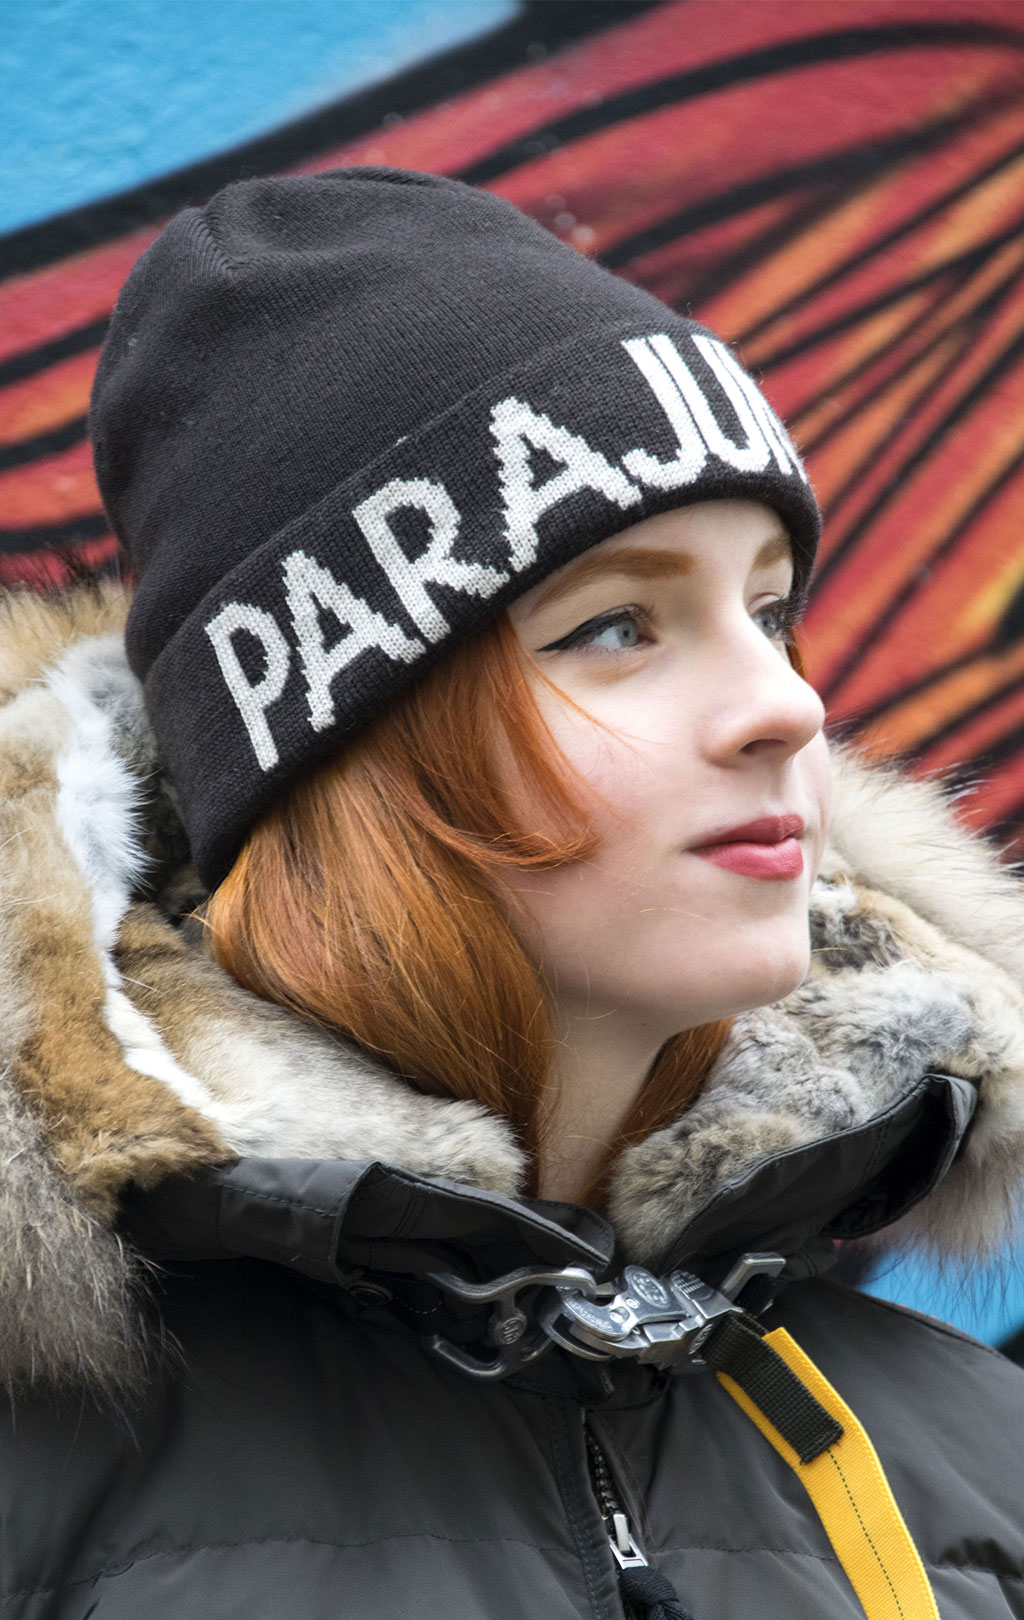 Шапка вязаная PARAJUMPERS PARAJUMPERS HAT FW 19/20 rave 